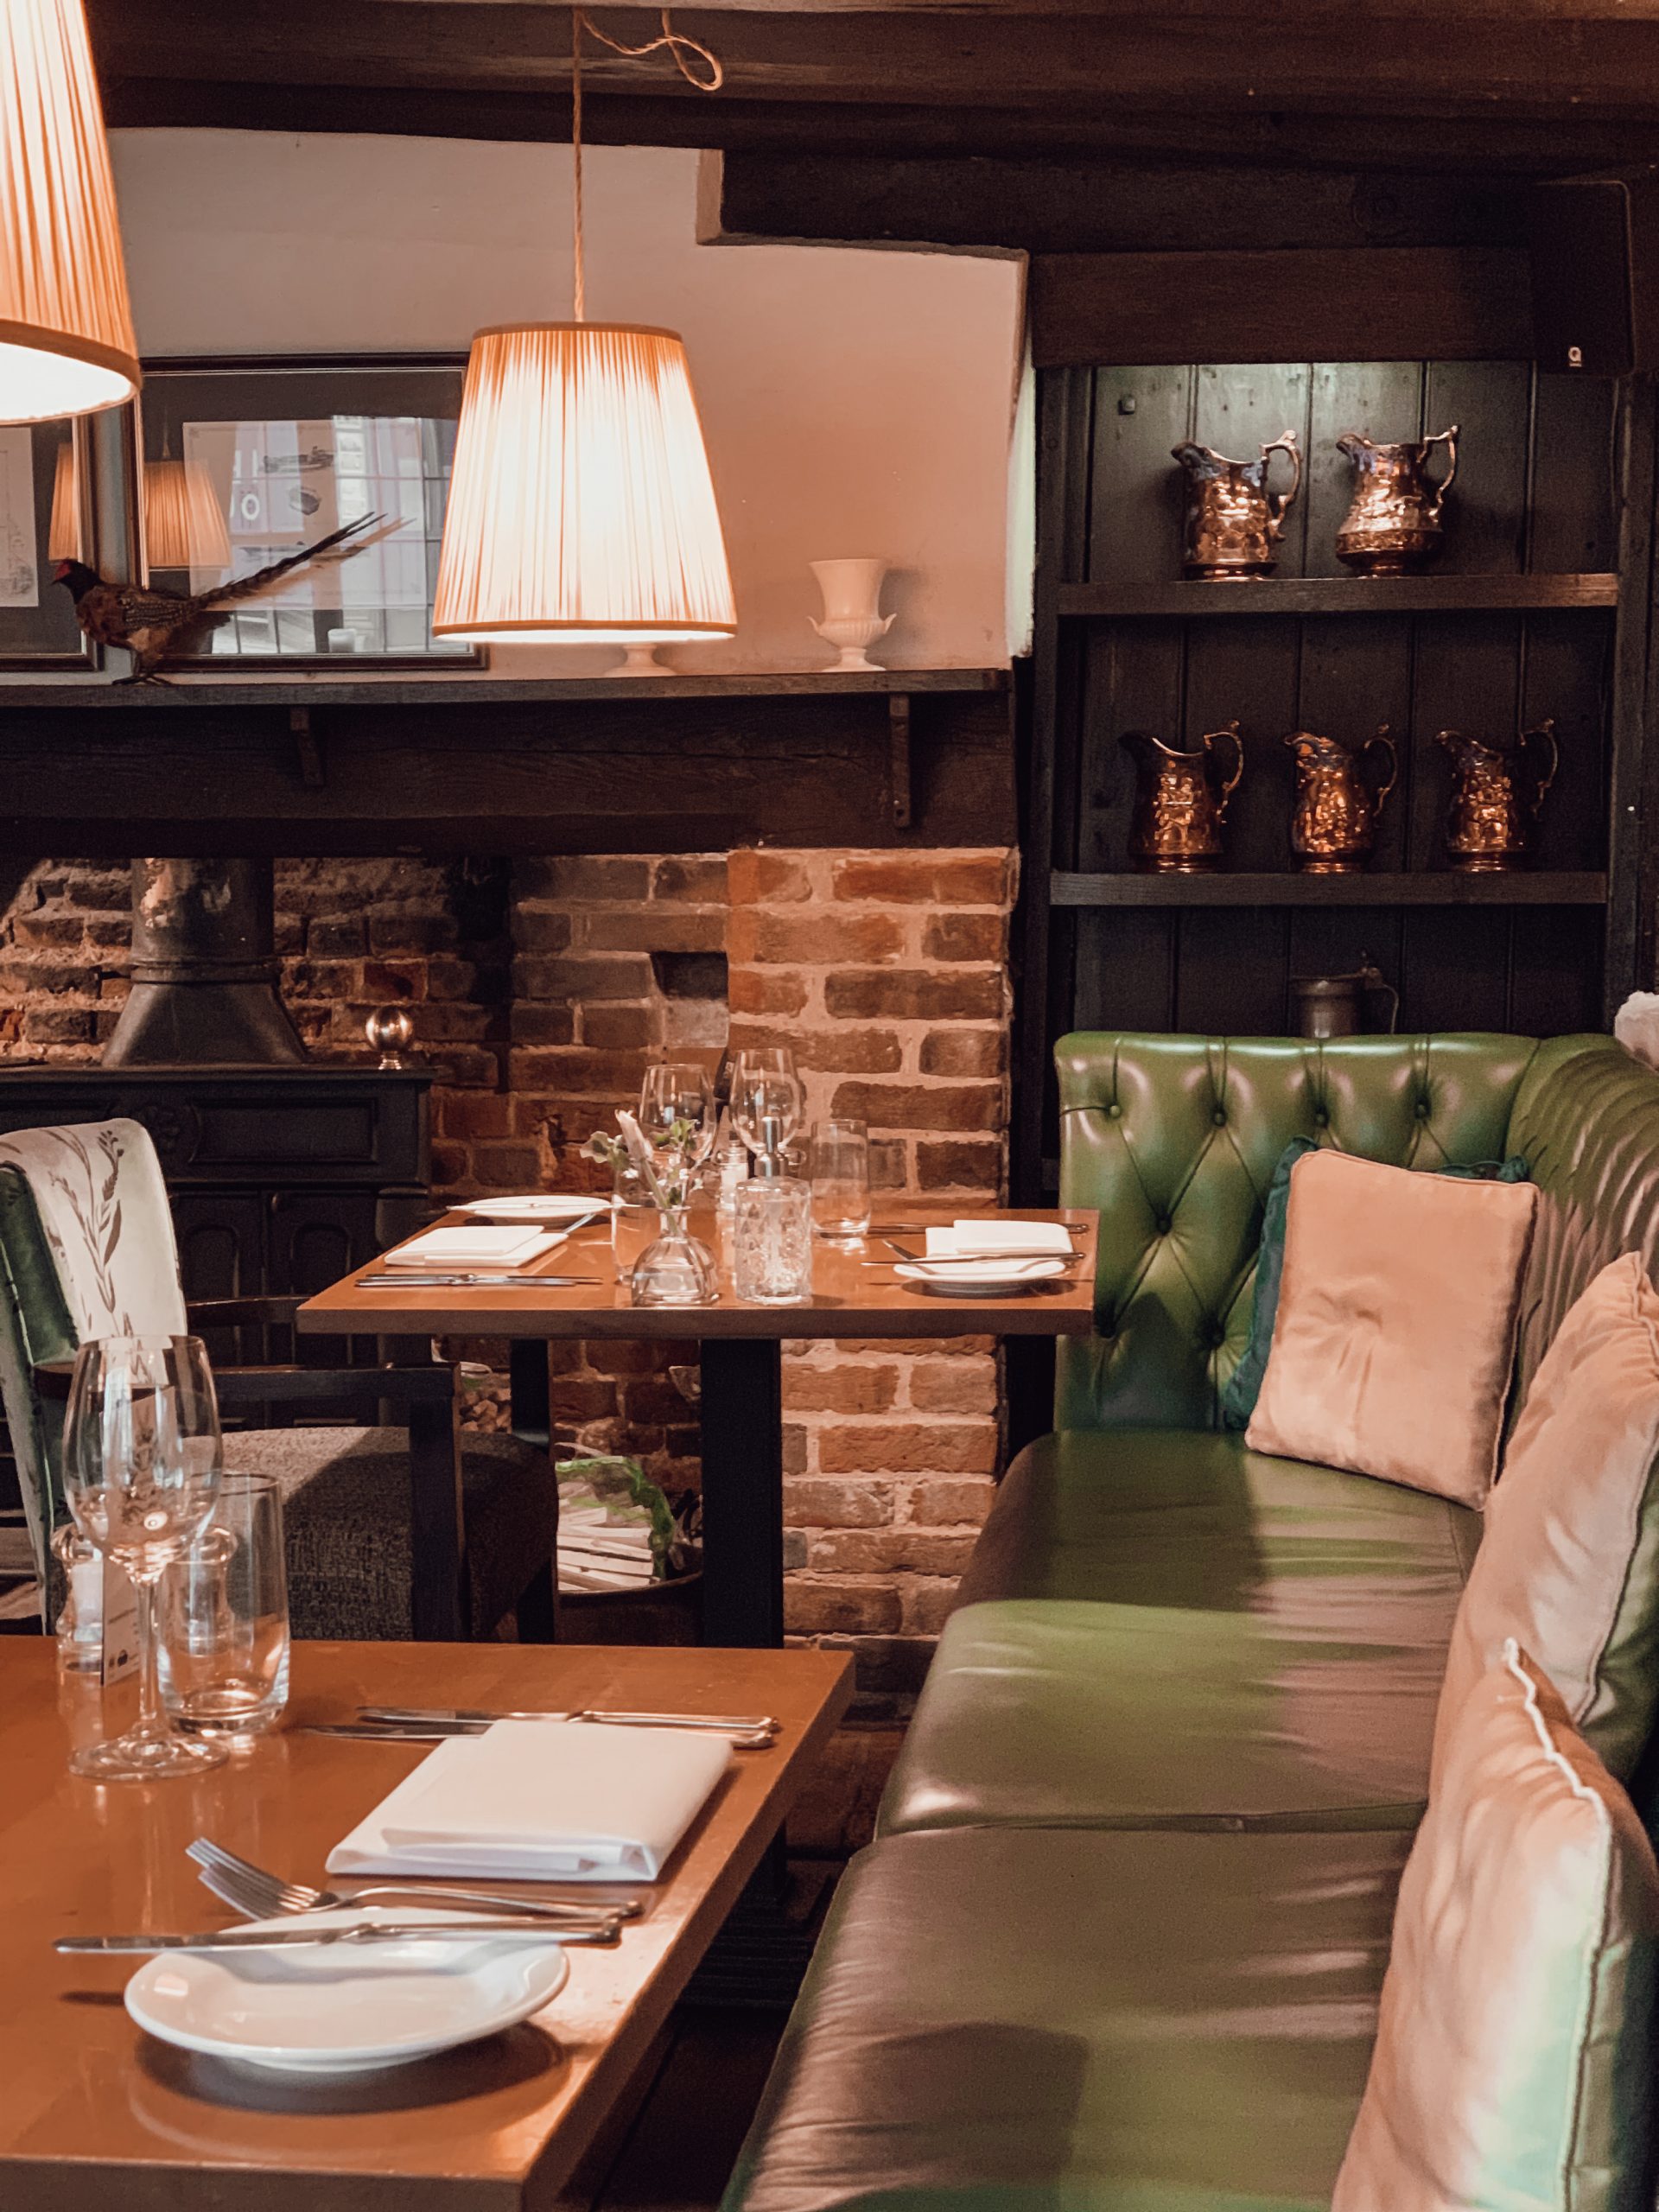 Winchester in England, perfect weekend away inspiration, holiday in the UK | Chesil Rectory Gourmet Restaurant | Where to eat in Winchester